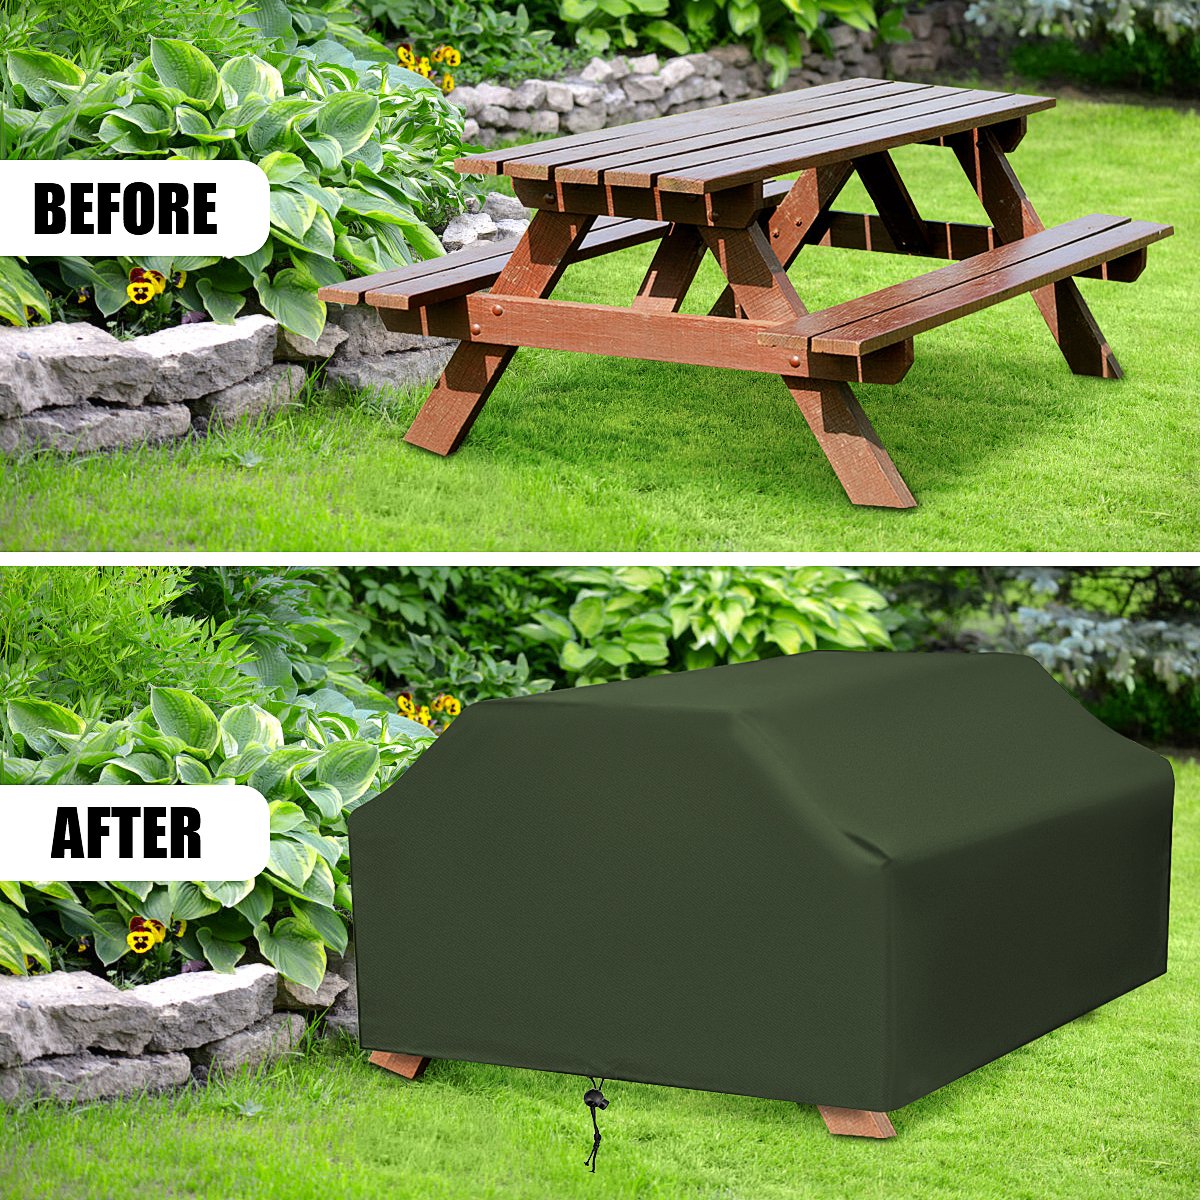 68-Seater-Waterproof-Table-Cover-Outdoor-Square-Tablecloth-Tear-Resistant-Picnic-Table-1750641-7